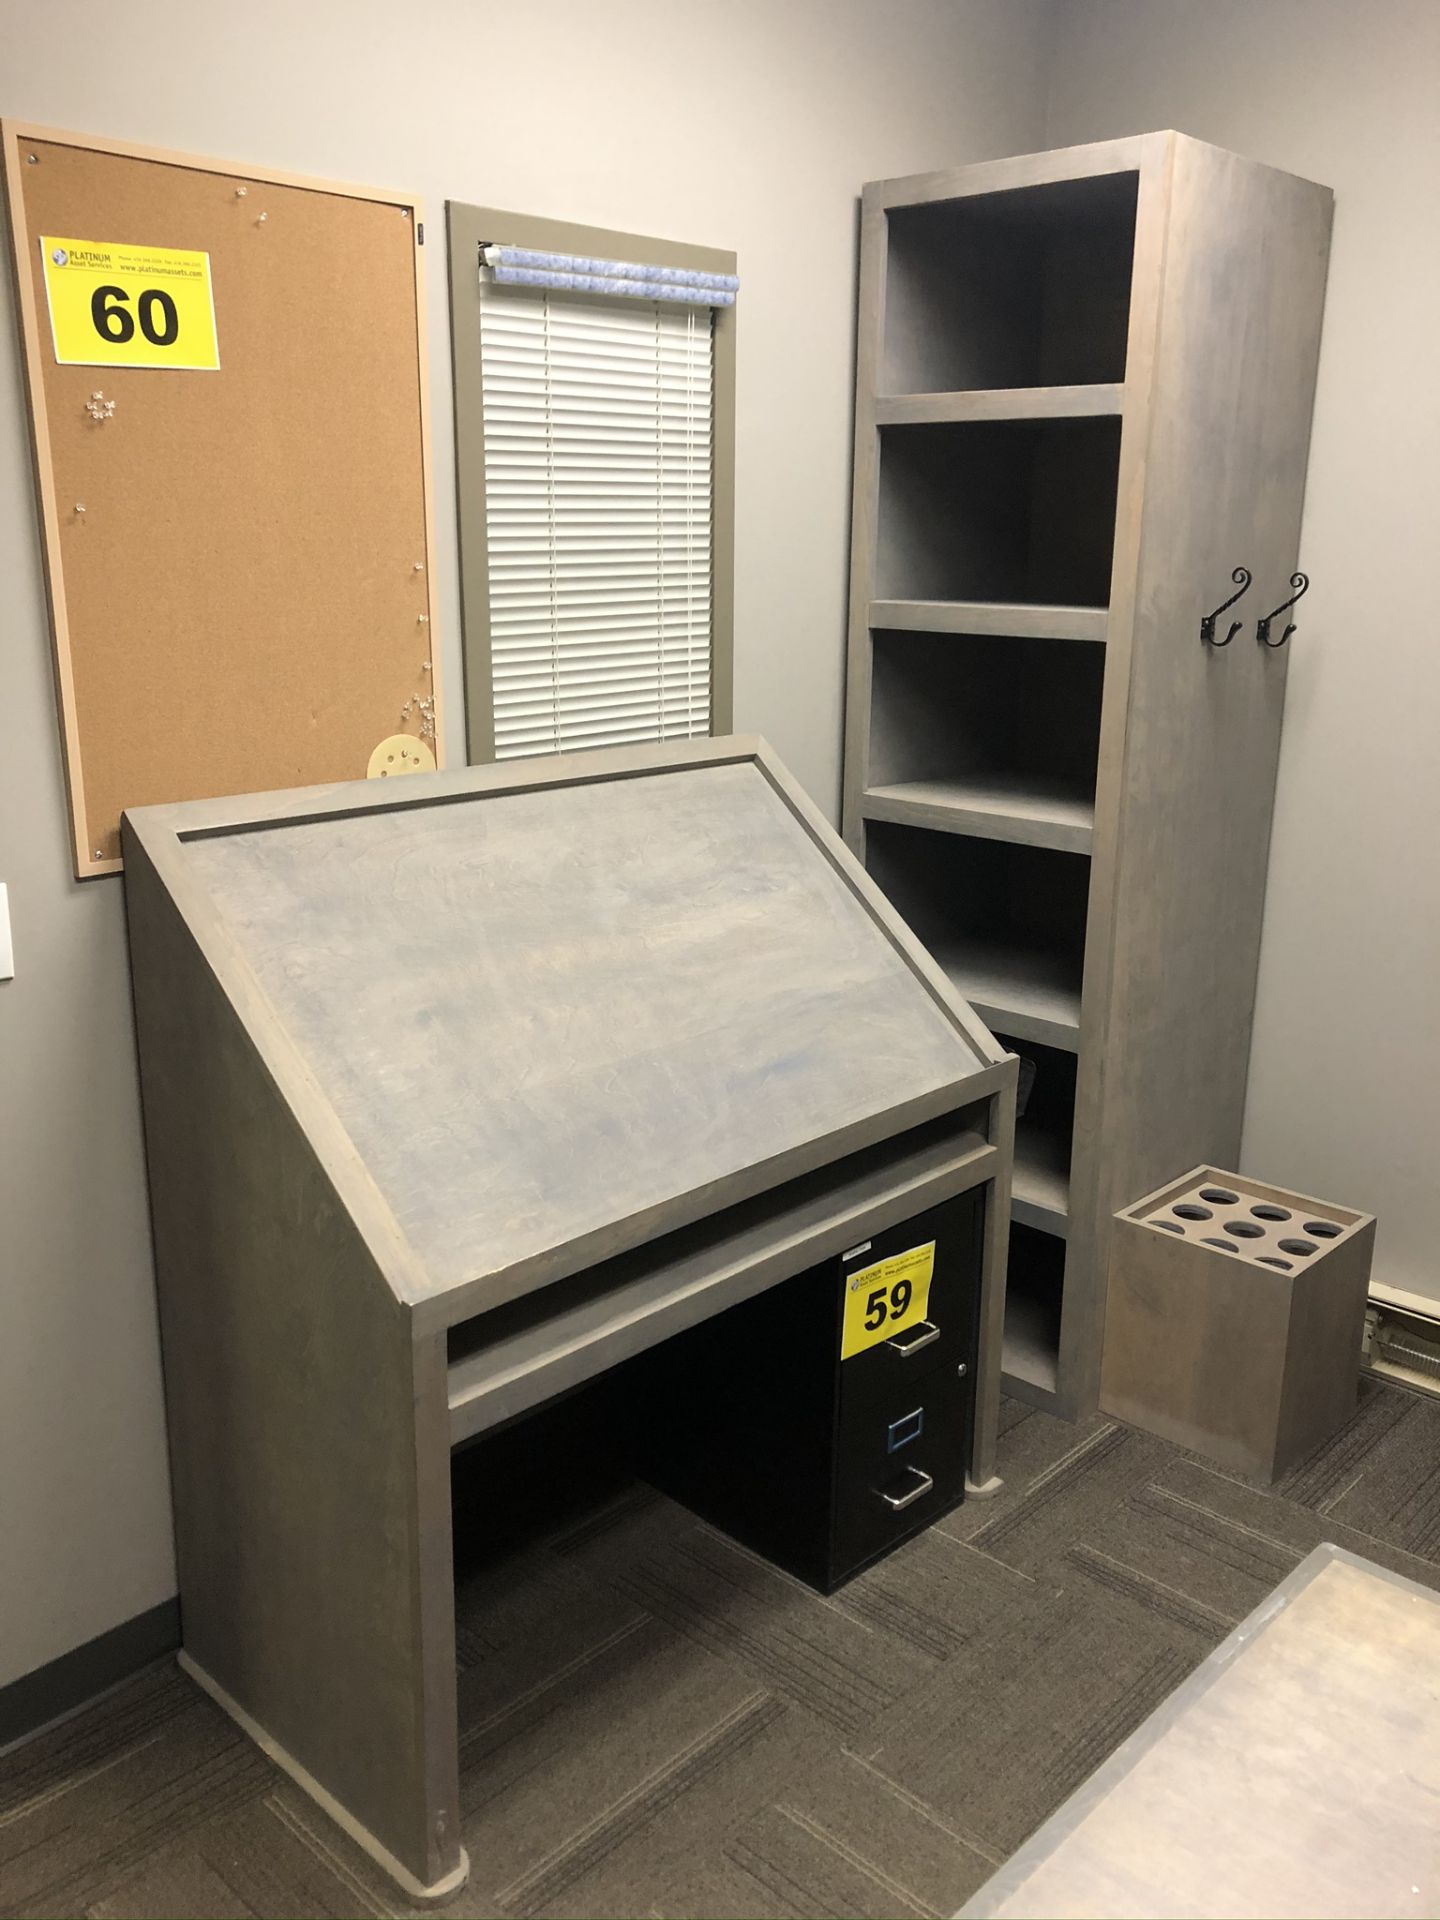 GRAY, L-SHAPED OFFICE DESK WITH DRAFTING TABLE, BOOKSHELF AND SITE PLANT FOLDER - Image 2 of 3